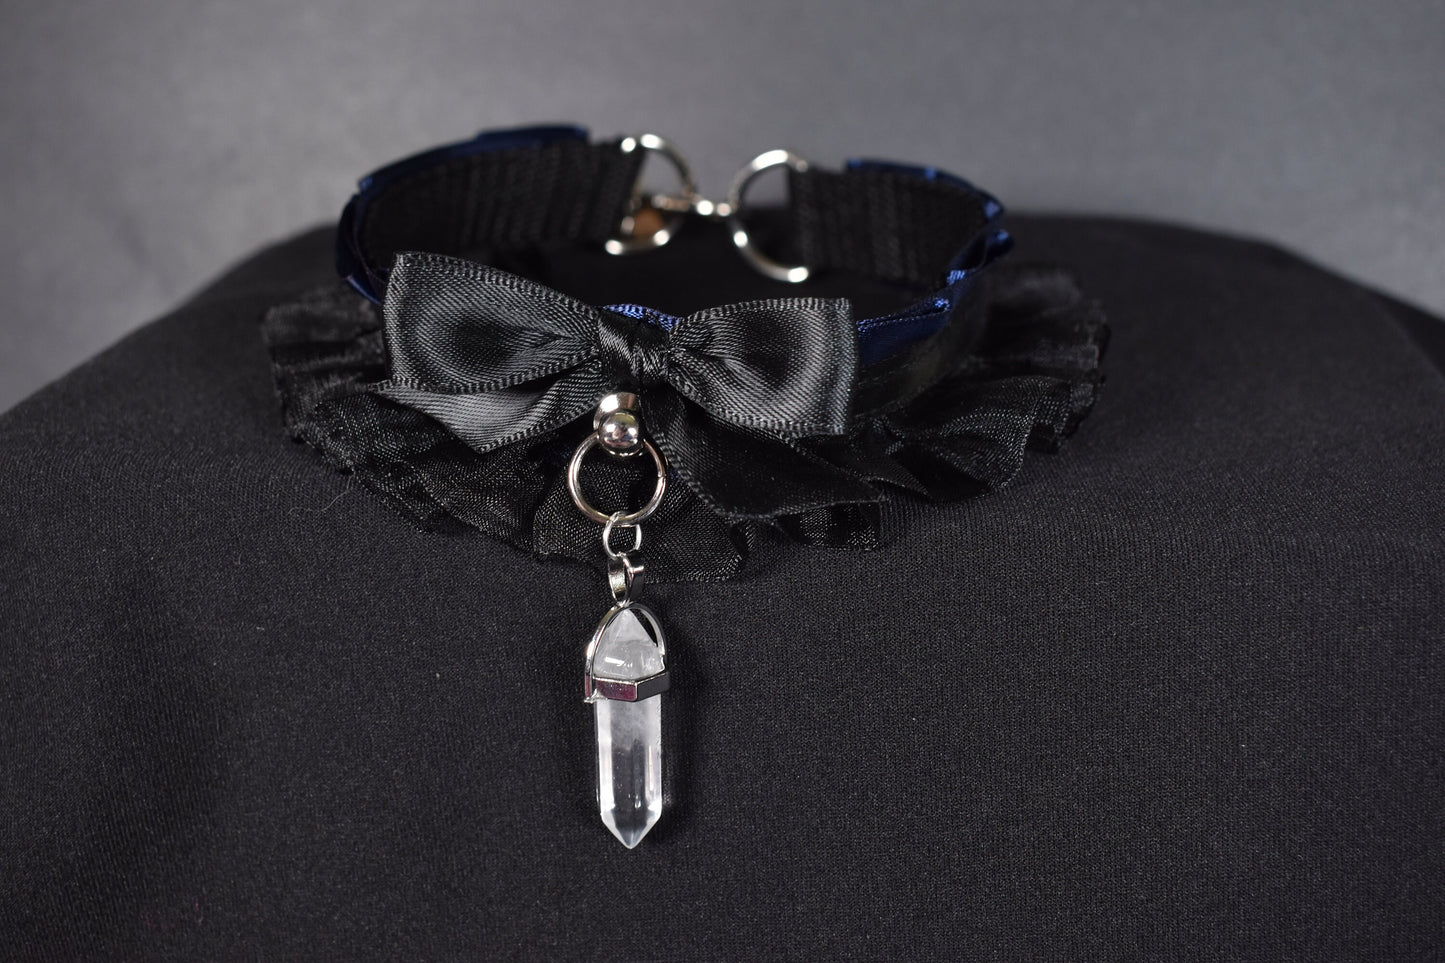 Made to your size / Navy goth choker / goth / emo / kitten play / alt fashion / bdsm / pet play necklace / kawaii fashion